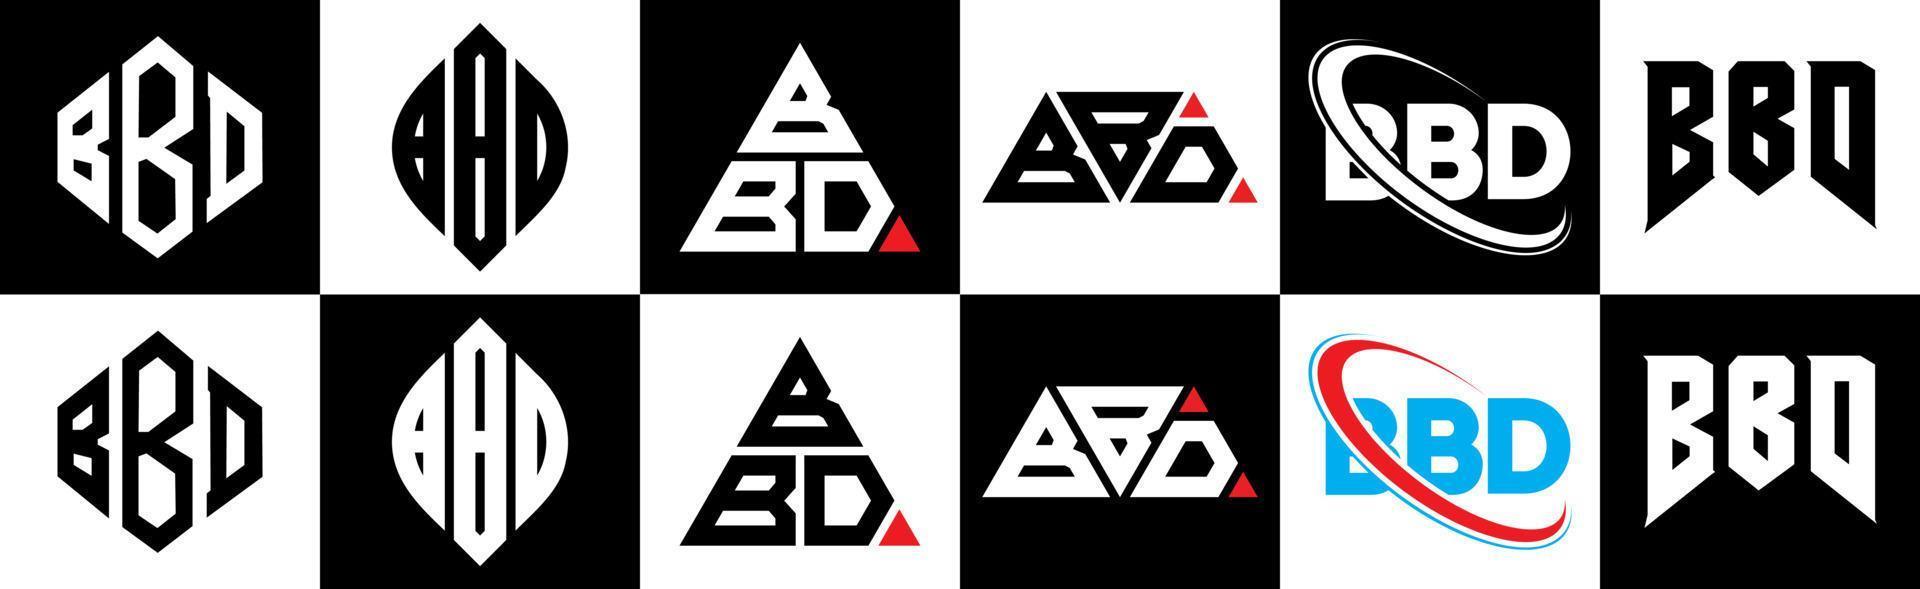 BBD letter logo design in six style. BBD polygon, circle, triangle, hexagon, flat and simple style with black and white color variation letter logo set in one artboard. BBD minimalist and classic logo vector